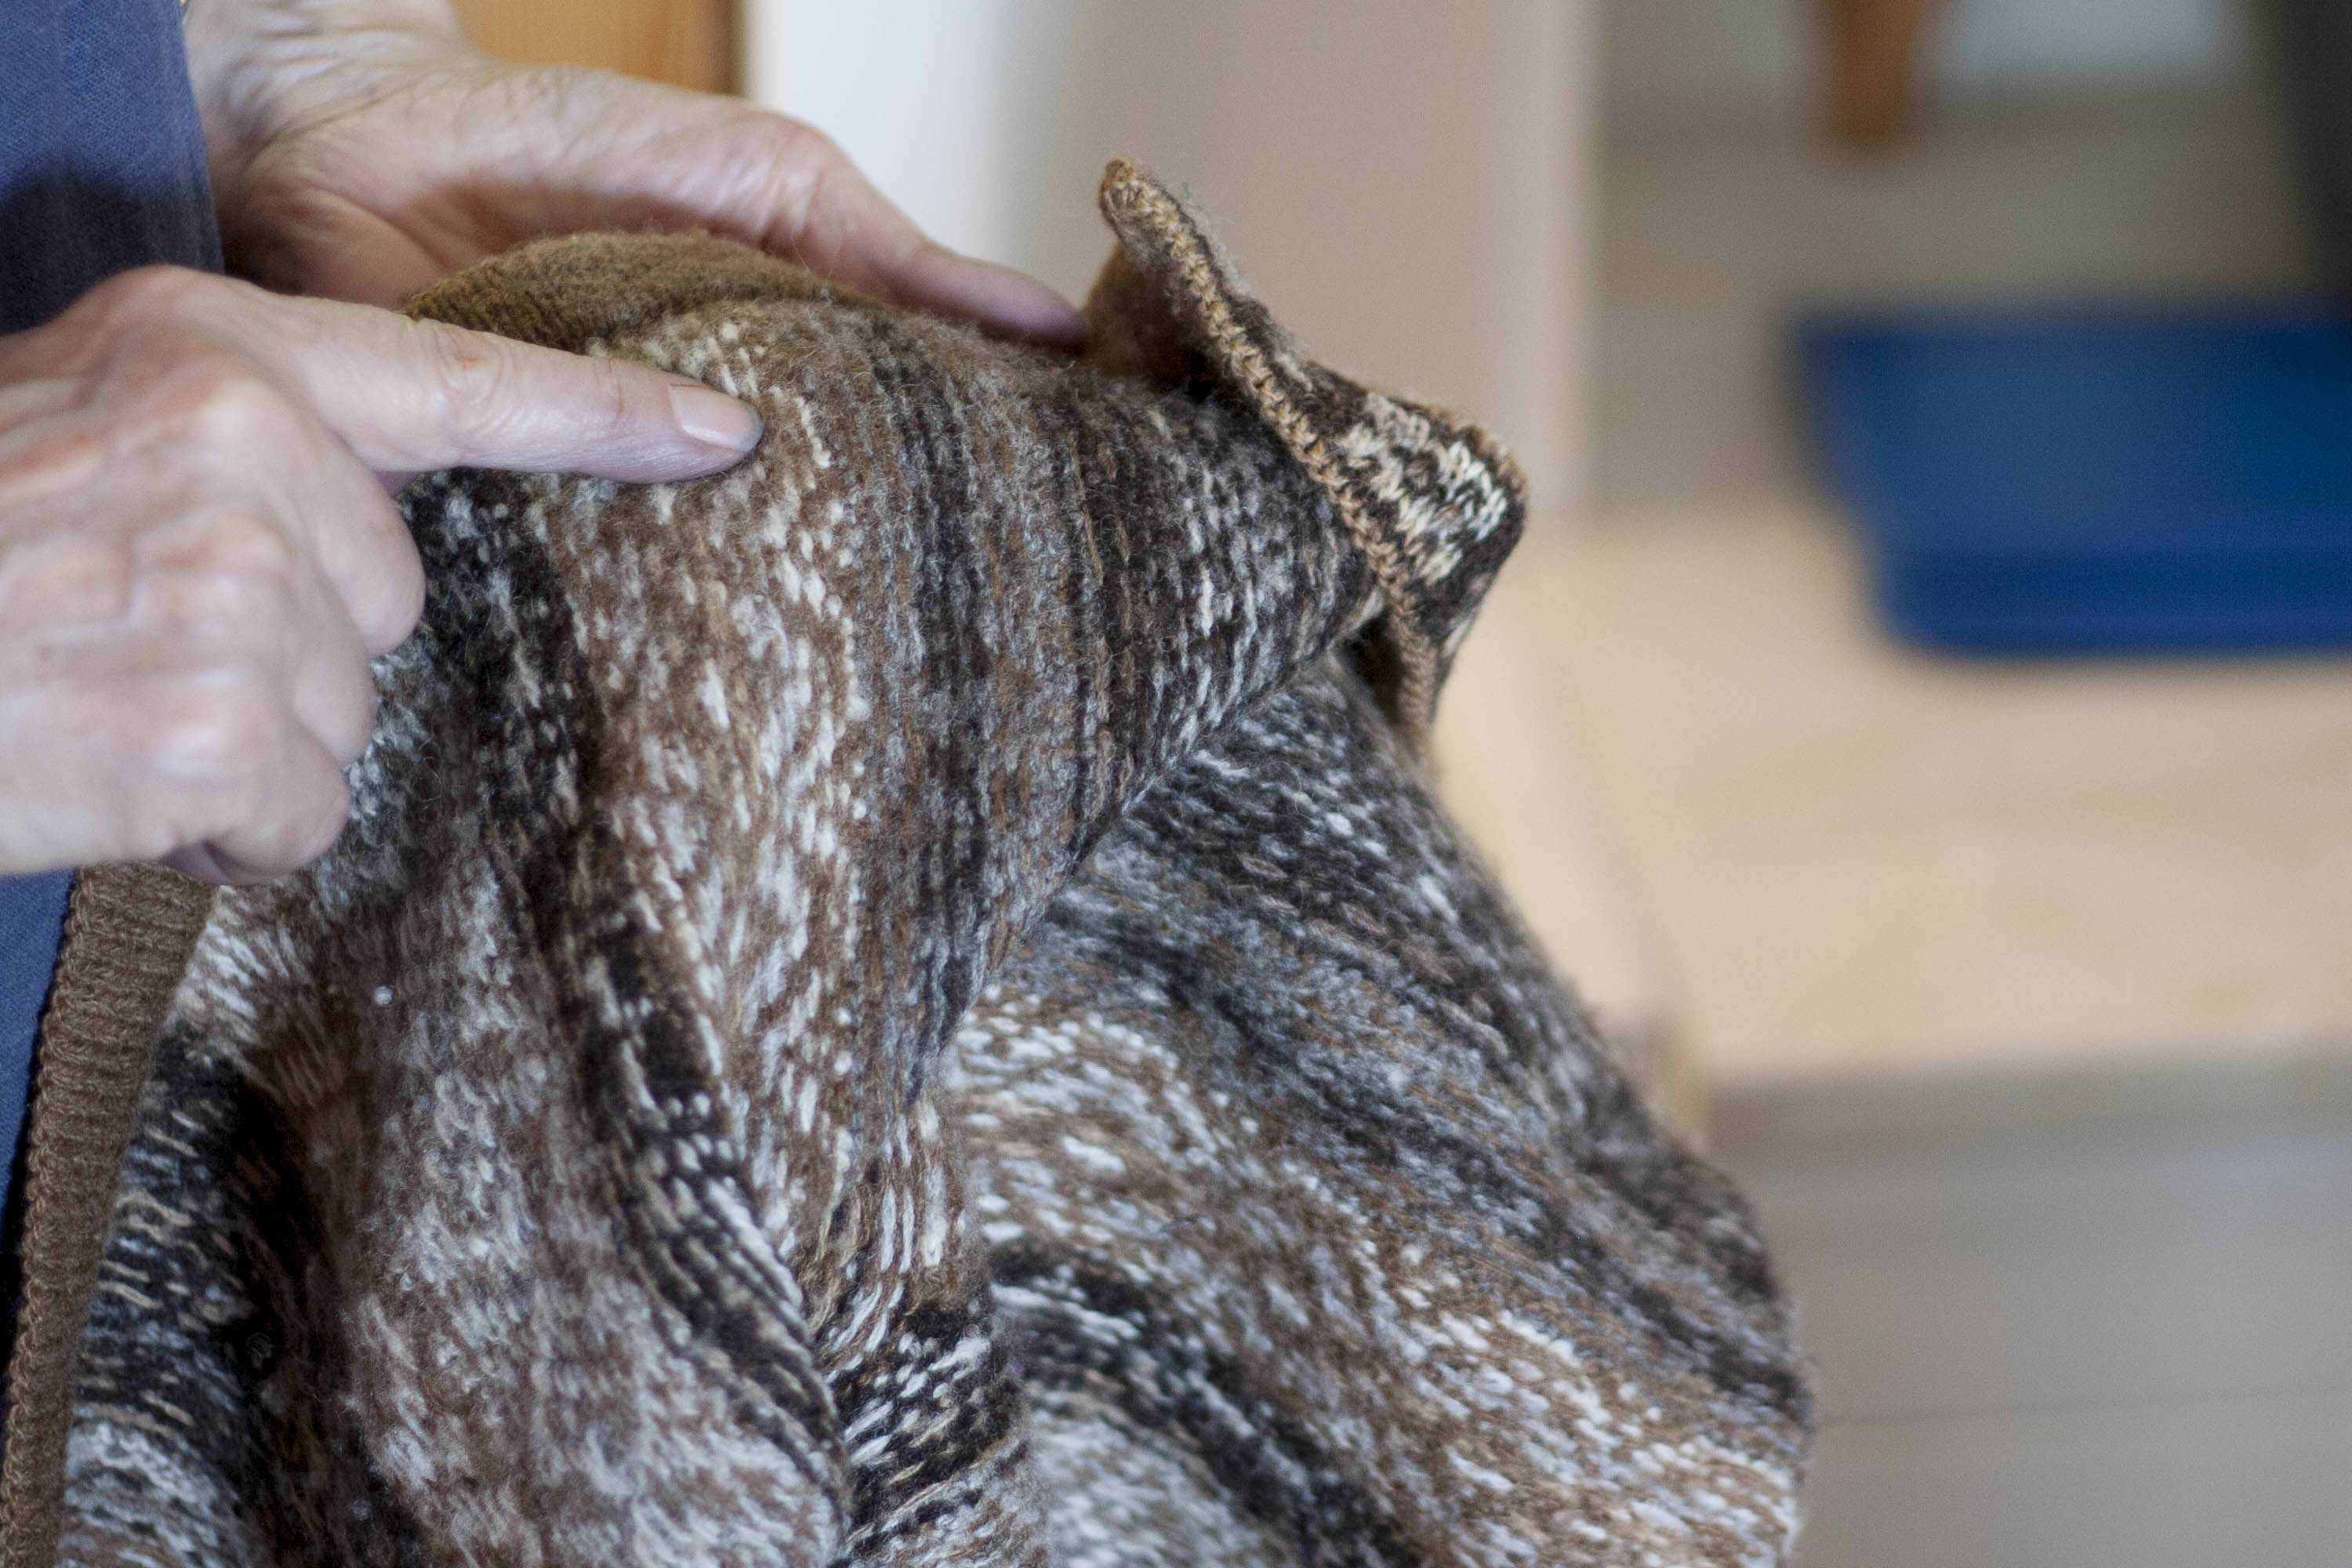 Rule-breaking, tradition and textile innovation in Shetland